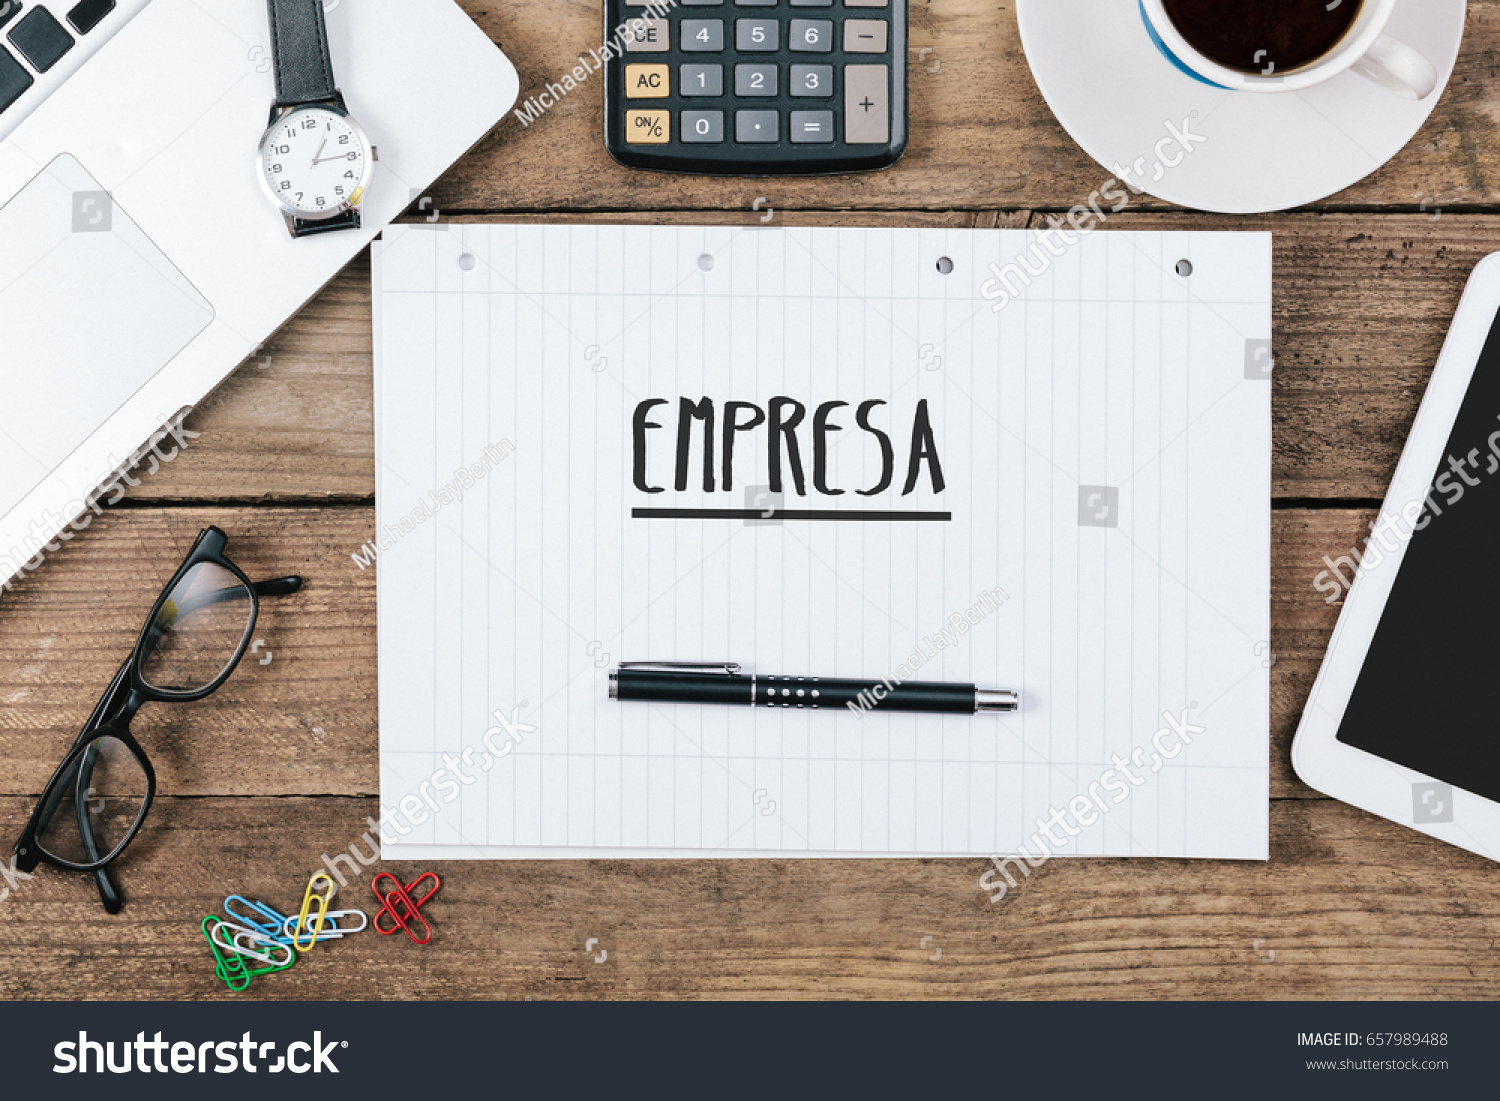 Empresa Spanish Business Word On Note Stock Photo Edit Now 657989488